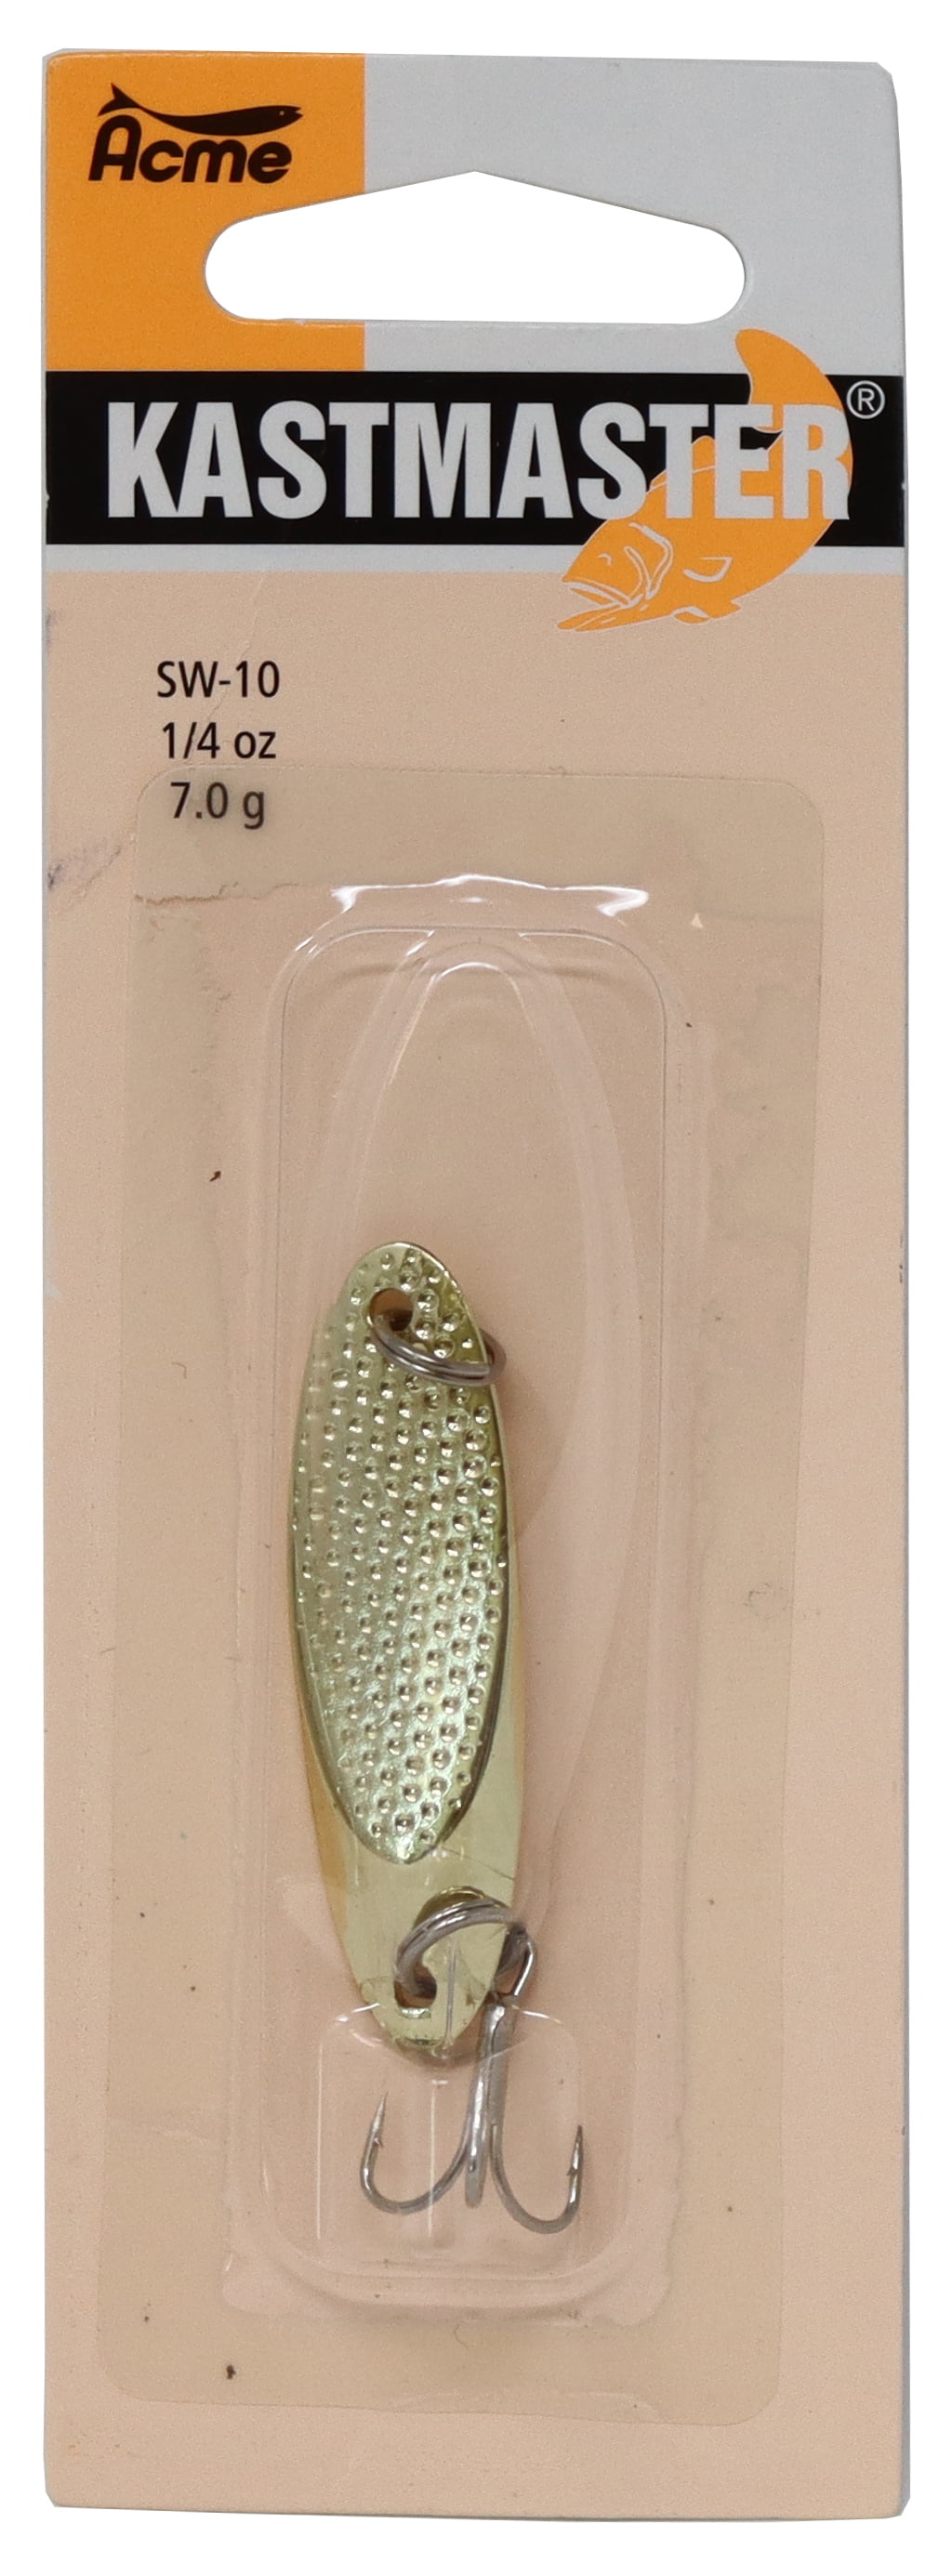 Acme Tackle Kastmaster Hammered Fishing Lure Spoon Gold 1/4 oz. 